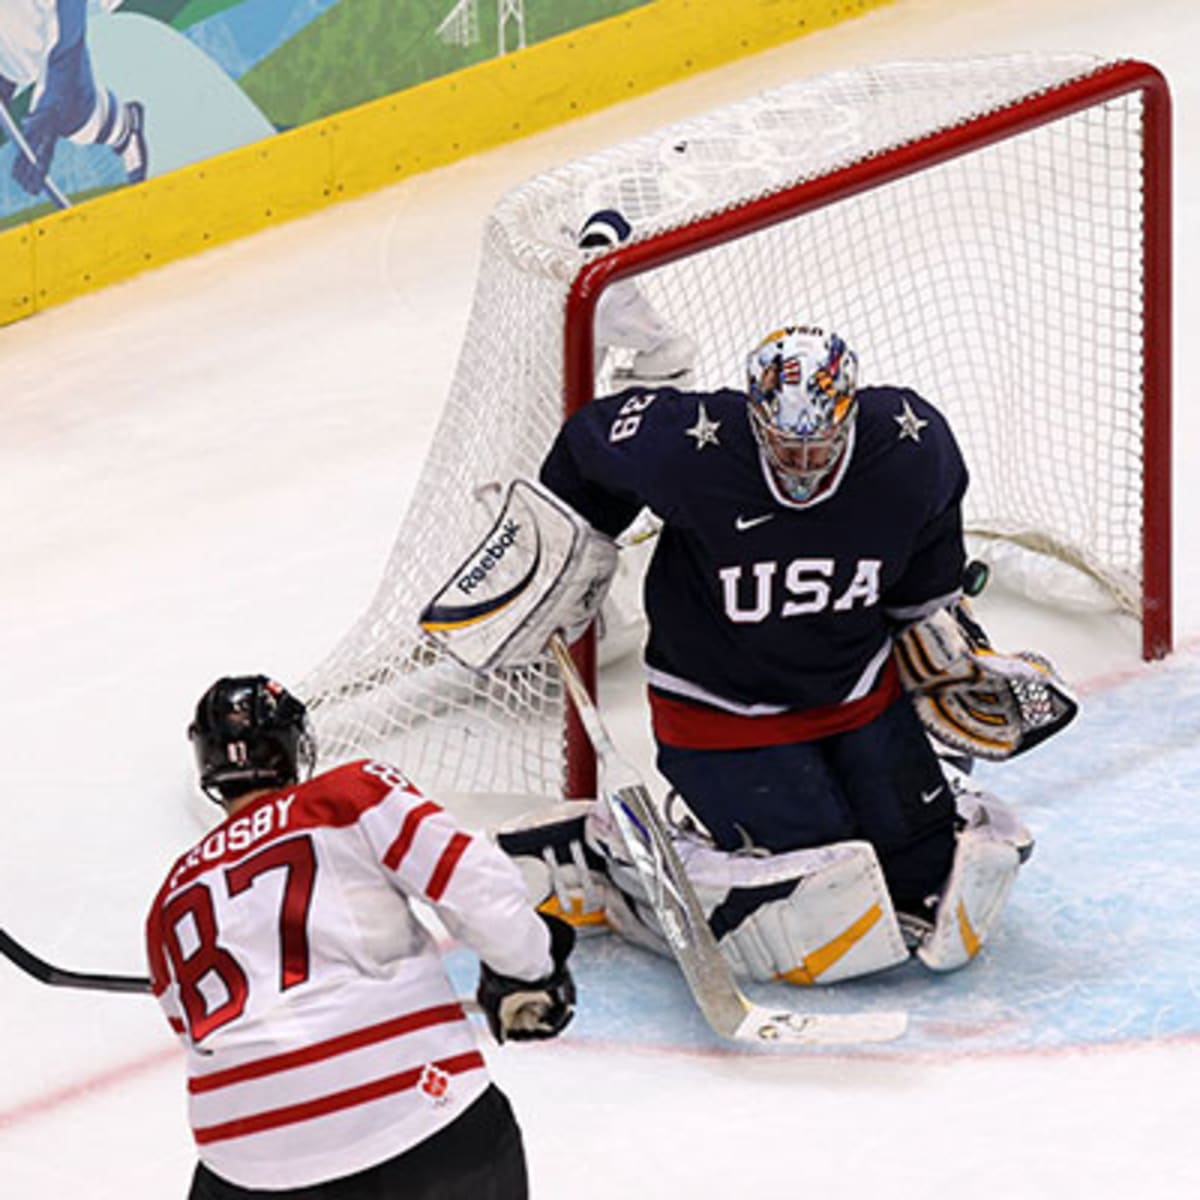 Bigger ice makes a big difference in Olympic hockey